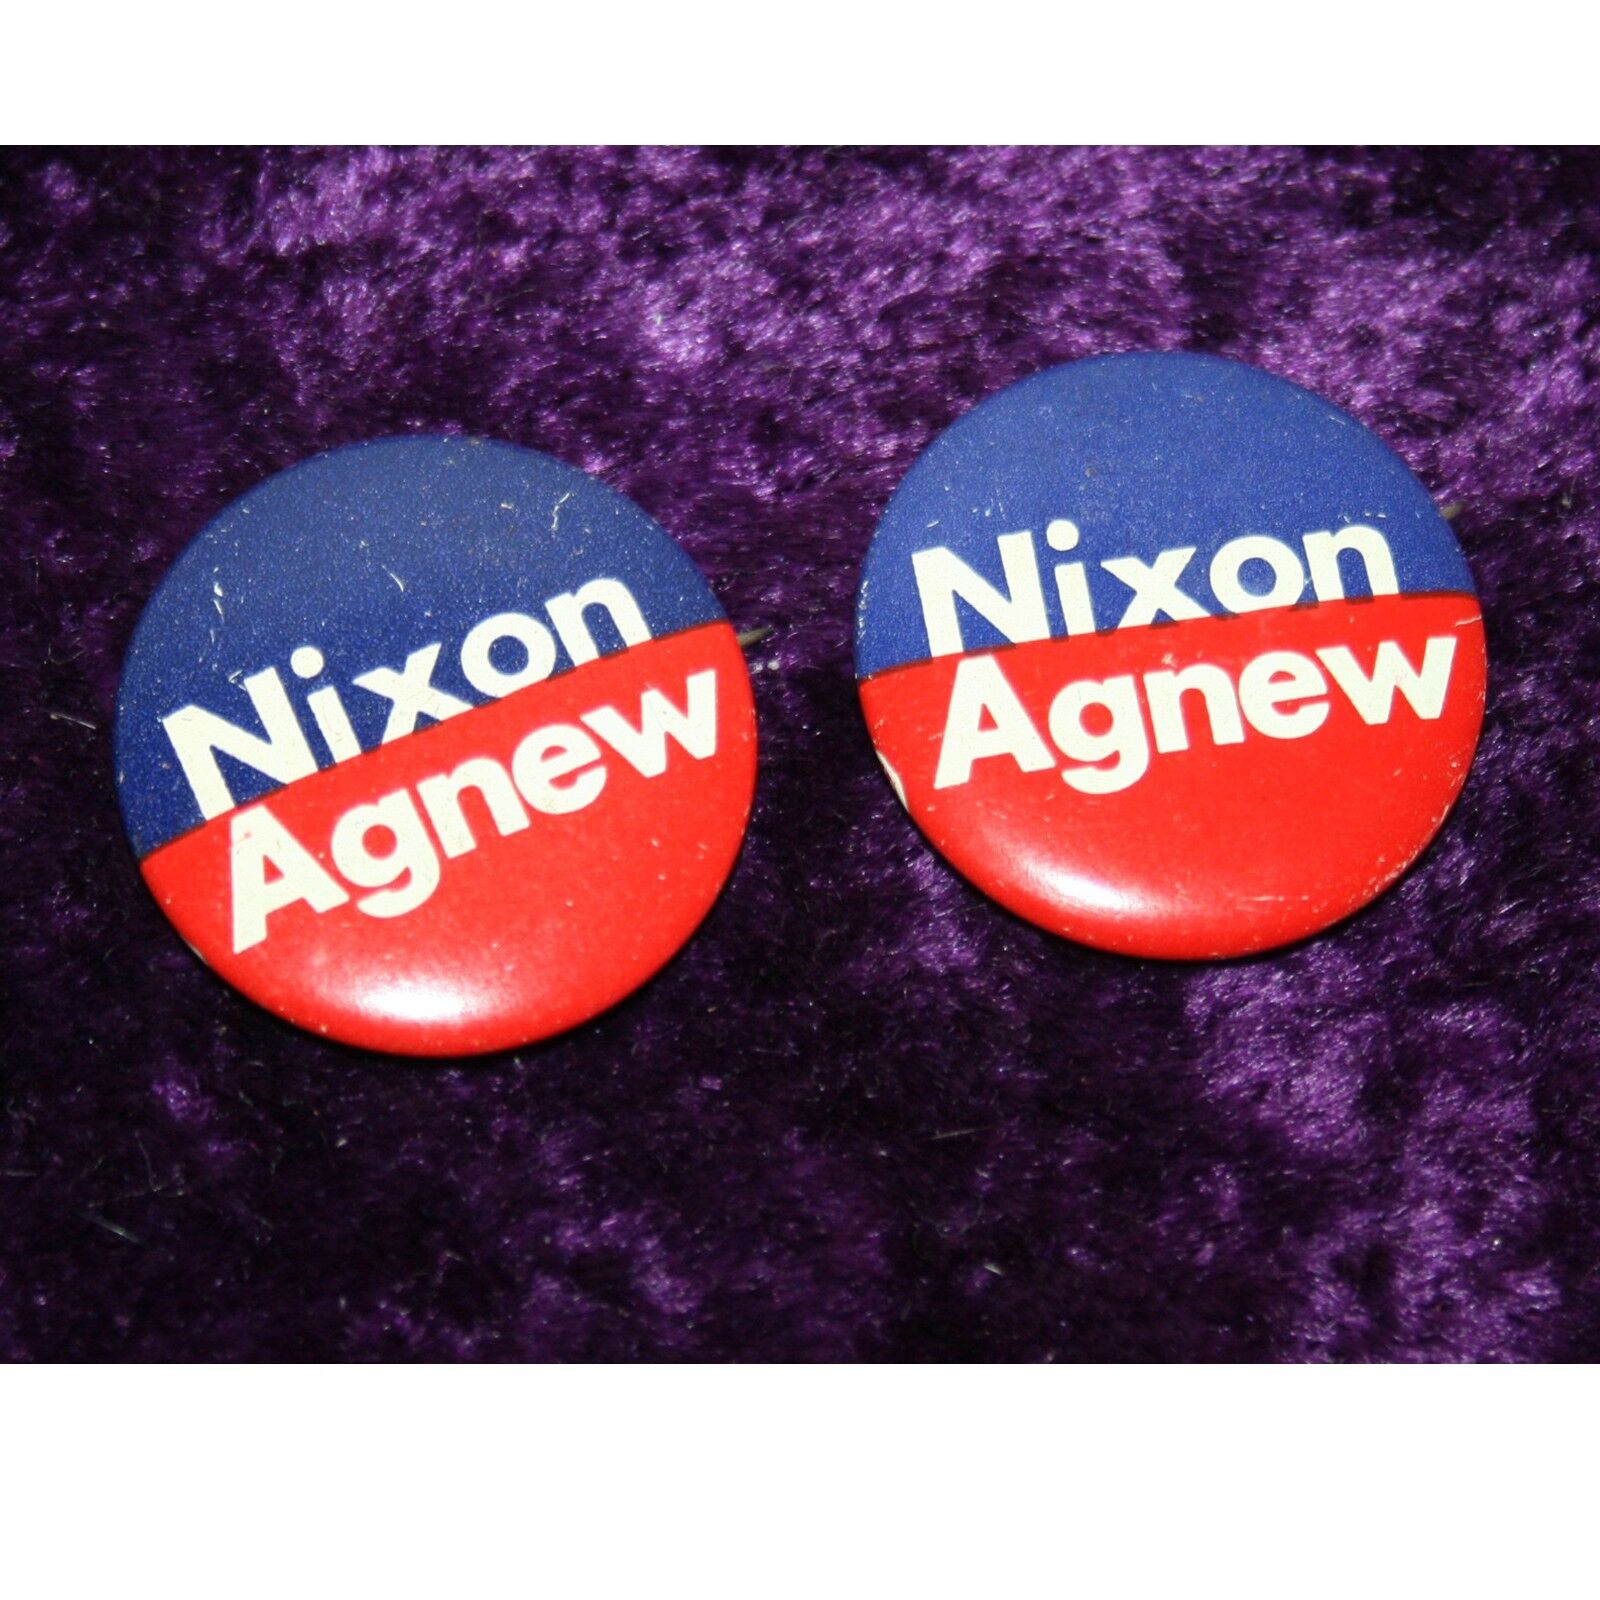 2 Nixon Agnew Political Pins 1960-70\'s Presidential Election Collectables